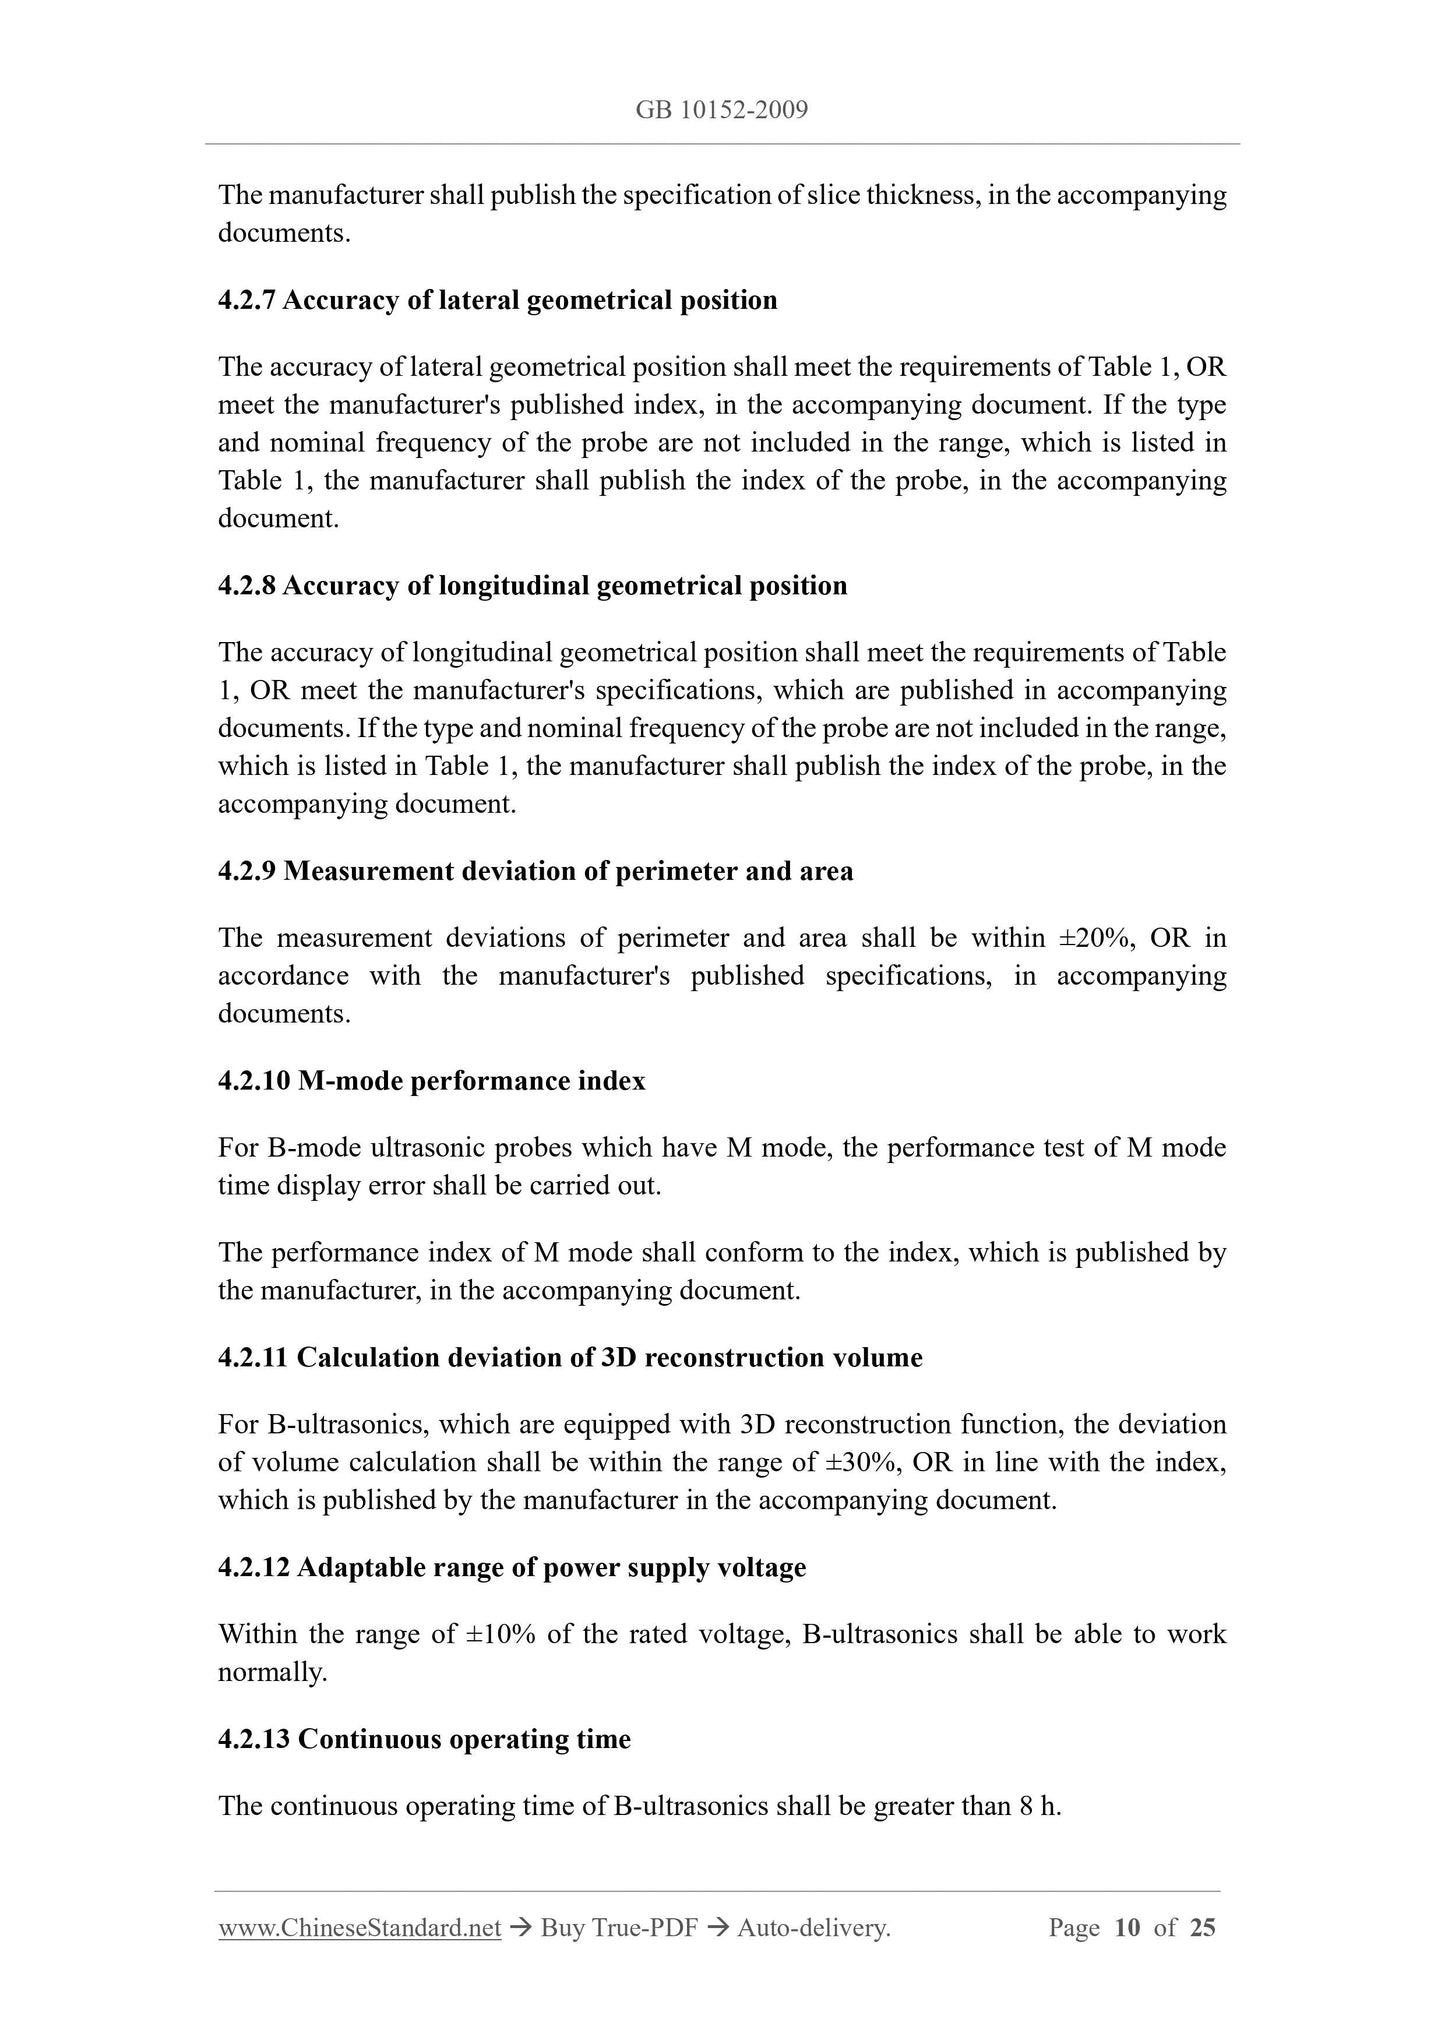 GB 10152-2009 Page 4